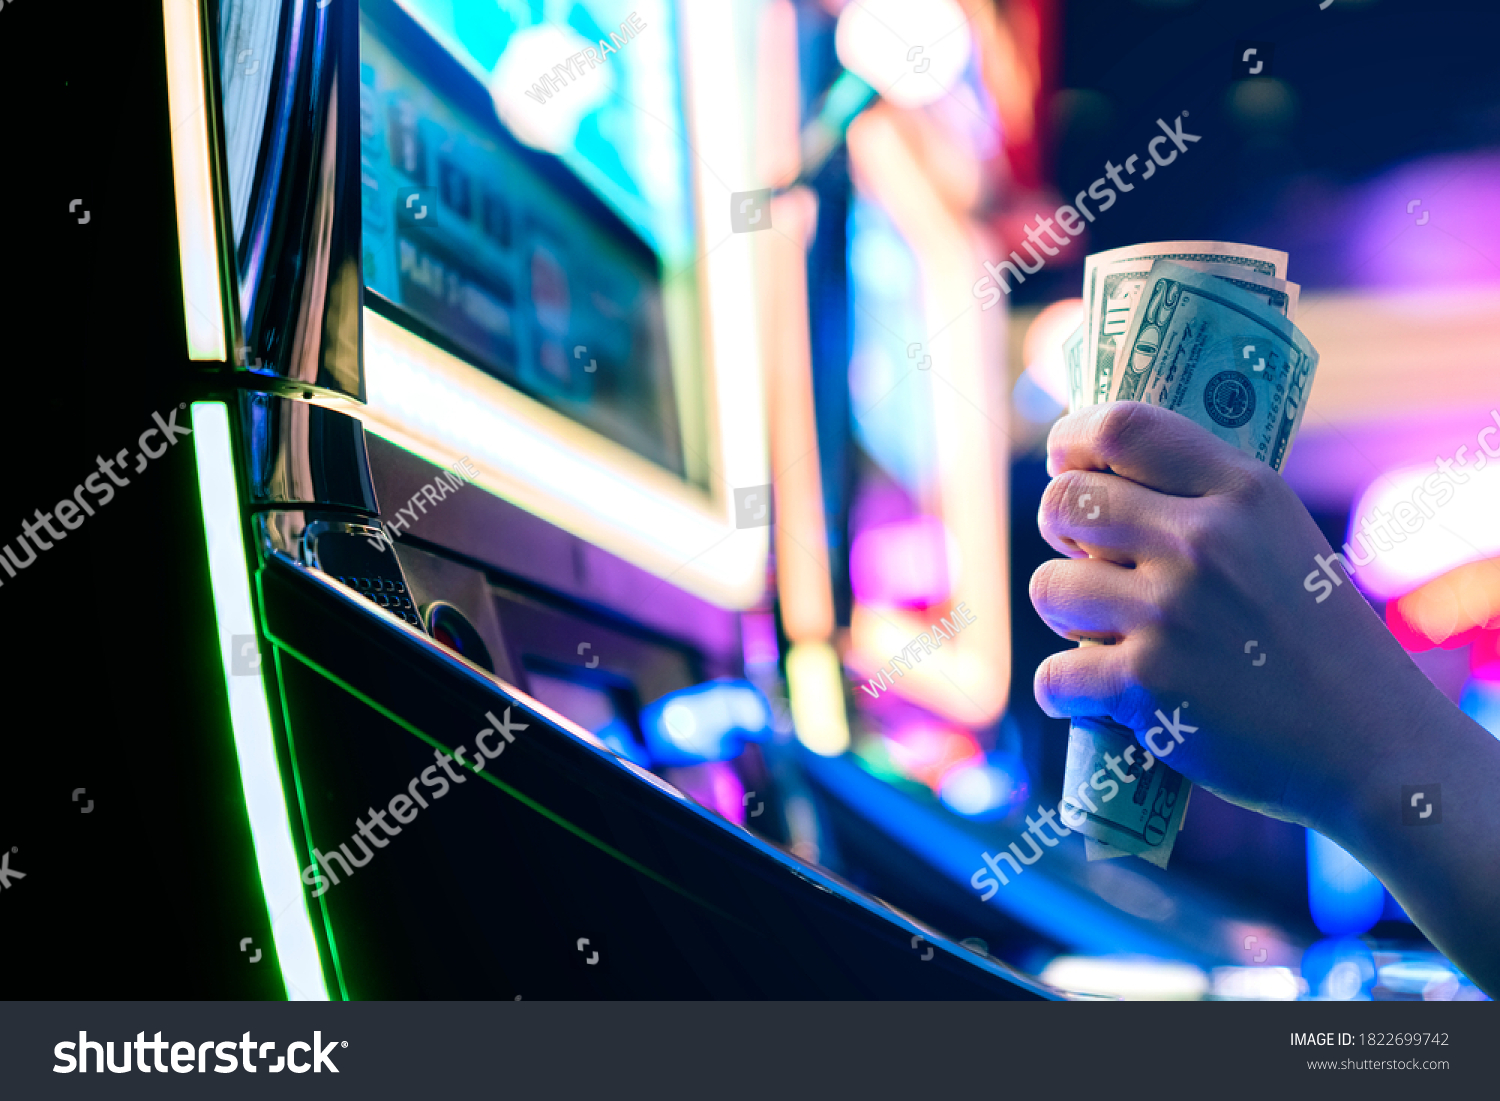 Slot Machine Play Time. Female Gambler Hand hold money bill ready to win the game with one best shot casino close up #1822699742